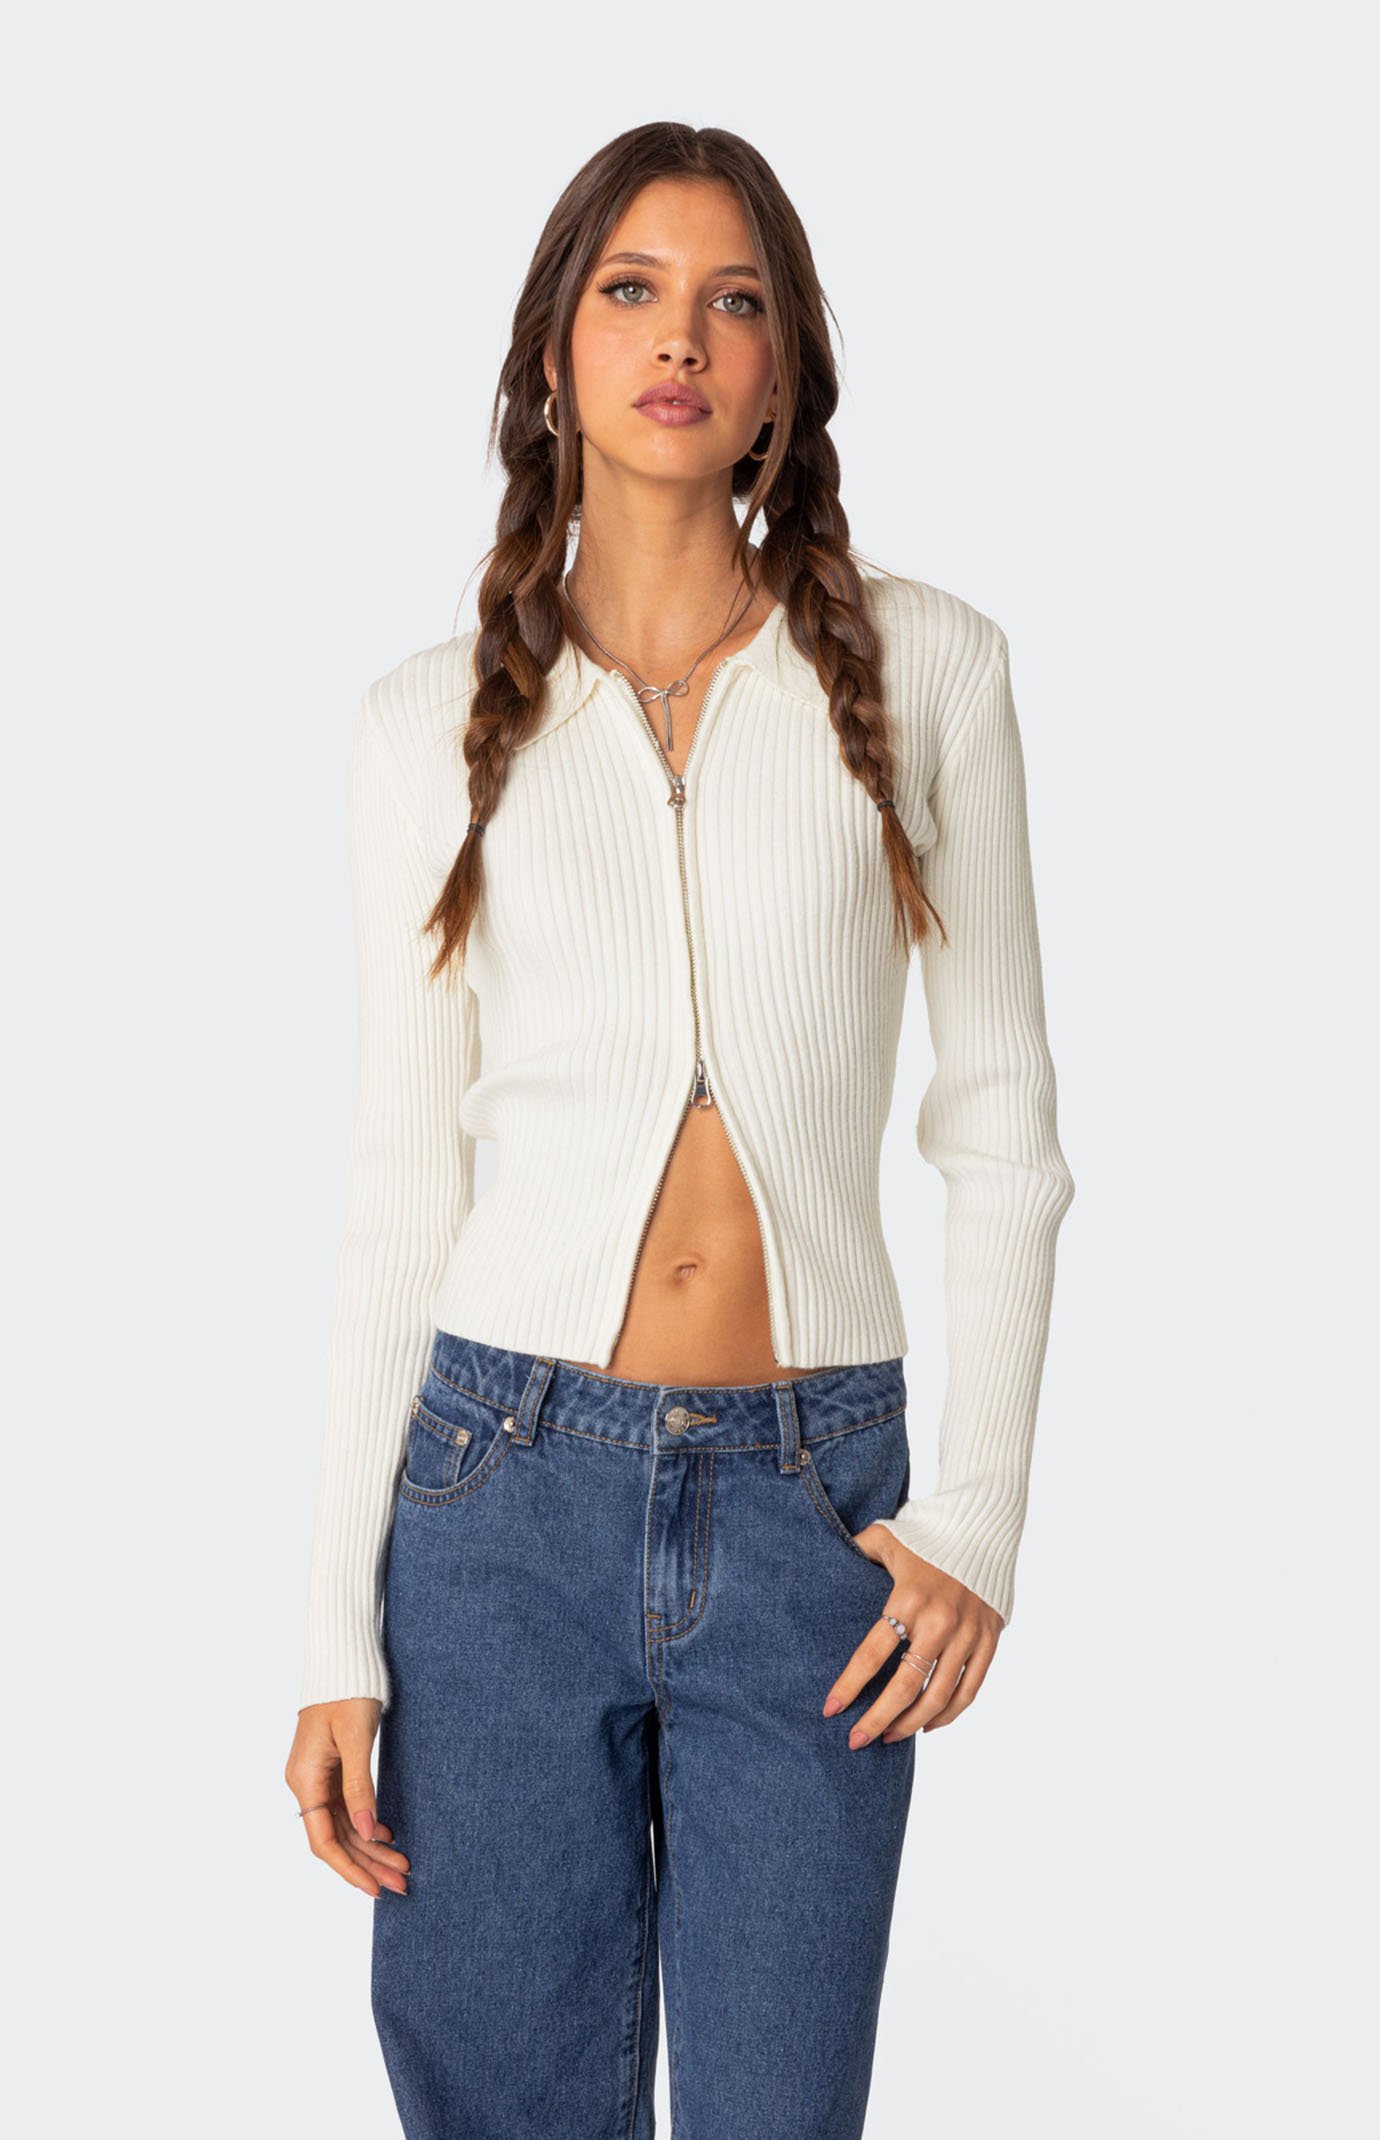 Cora Knitted Up | Cardigan PacSun Zip Edikted